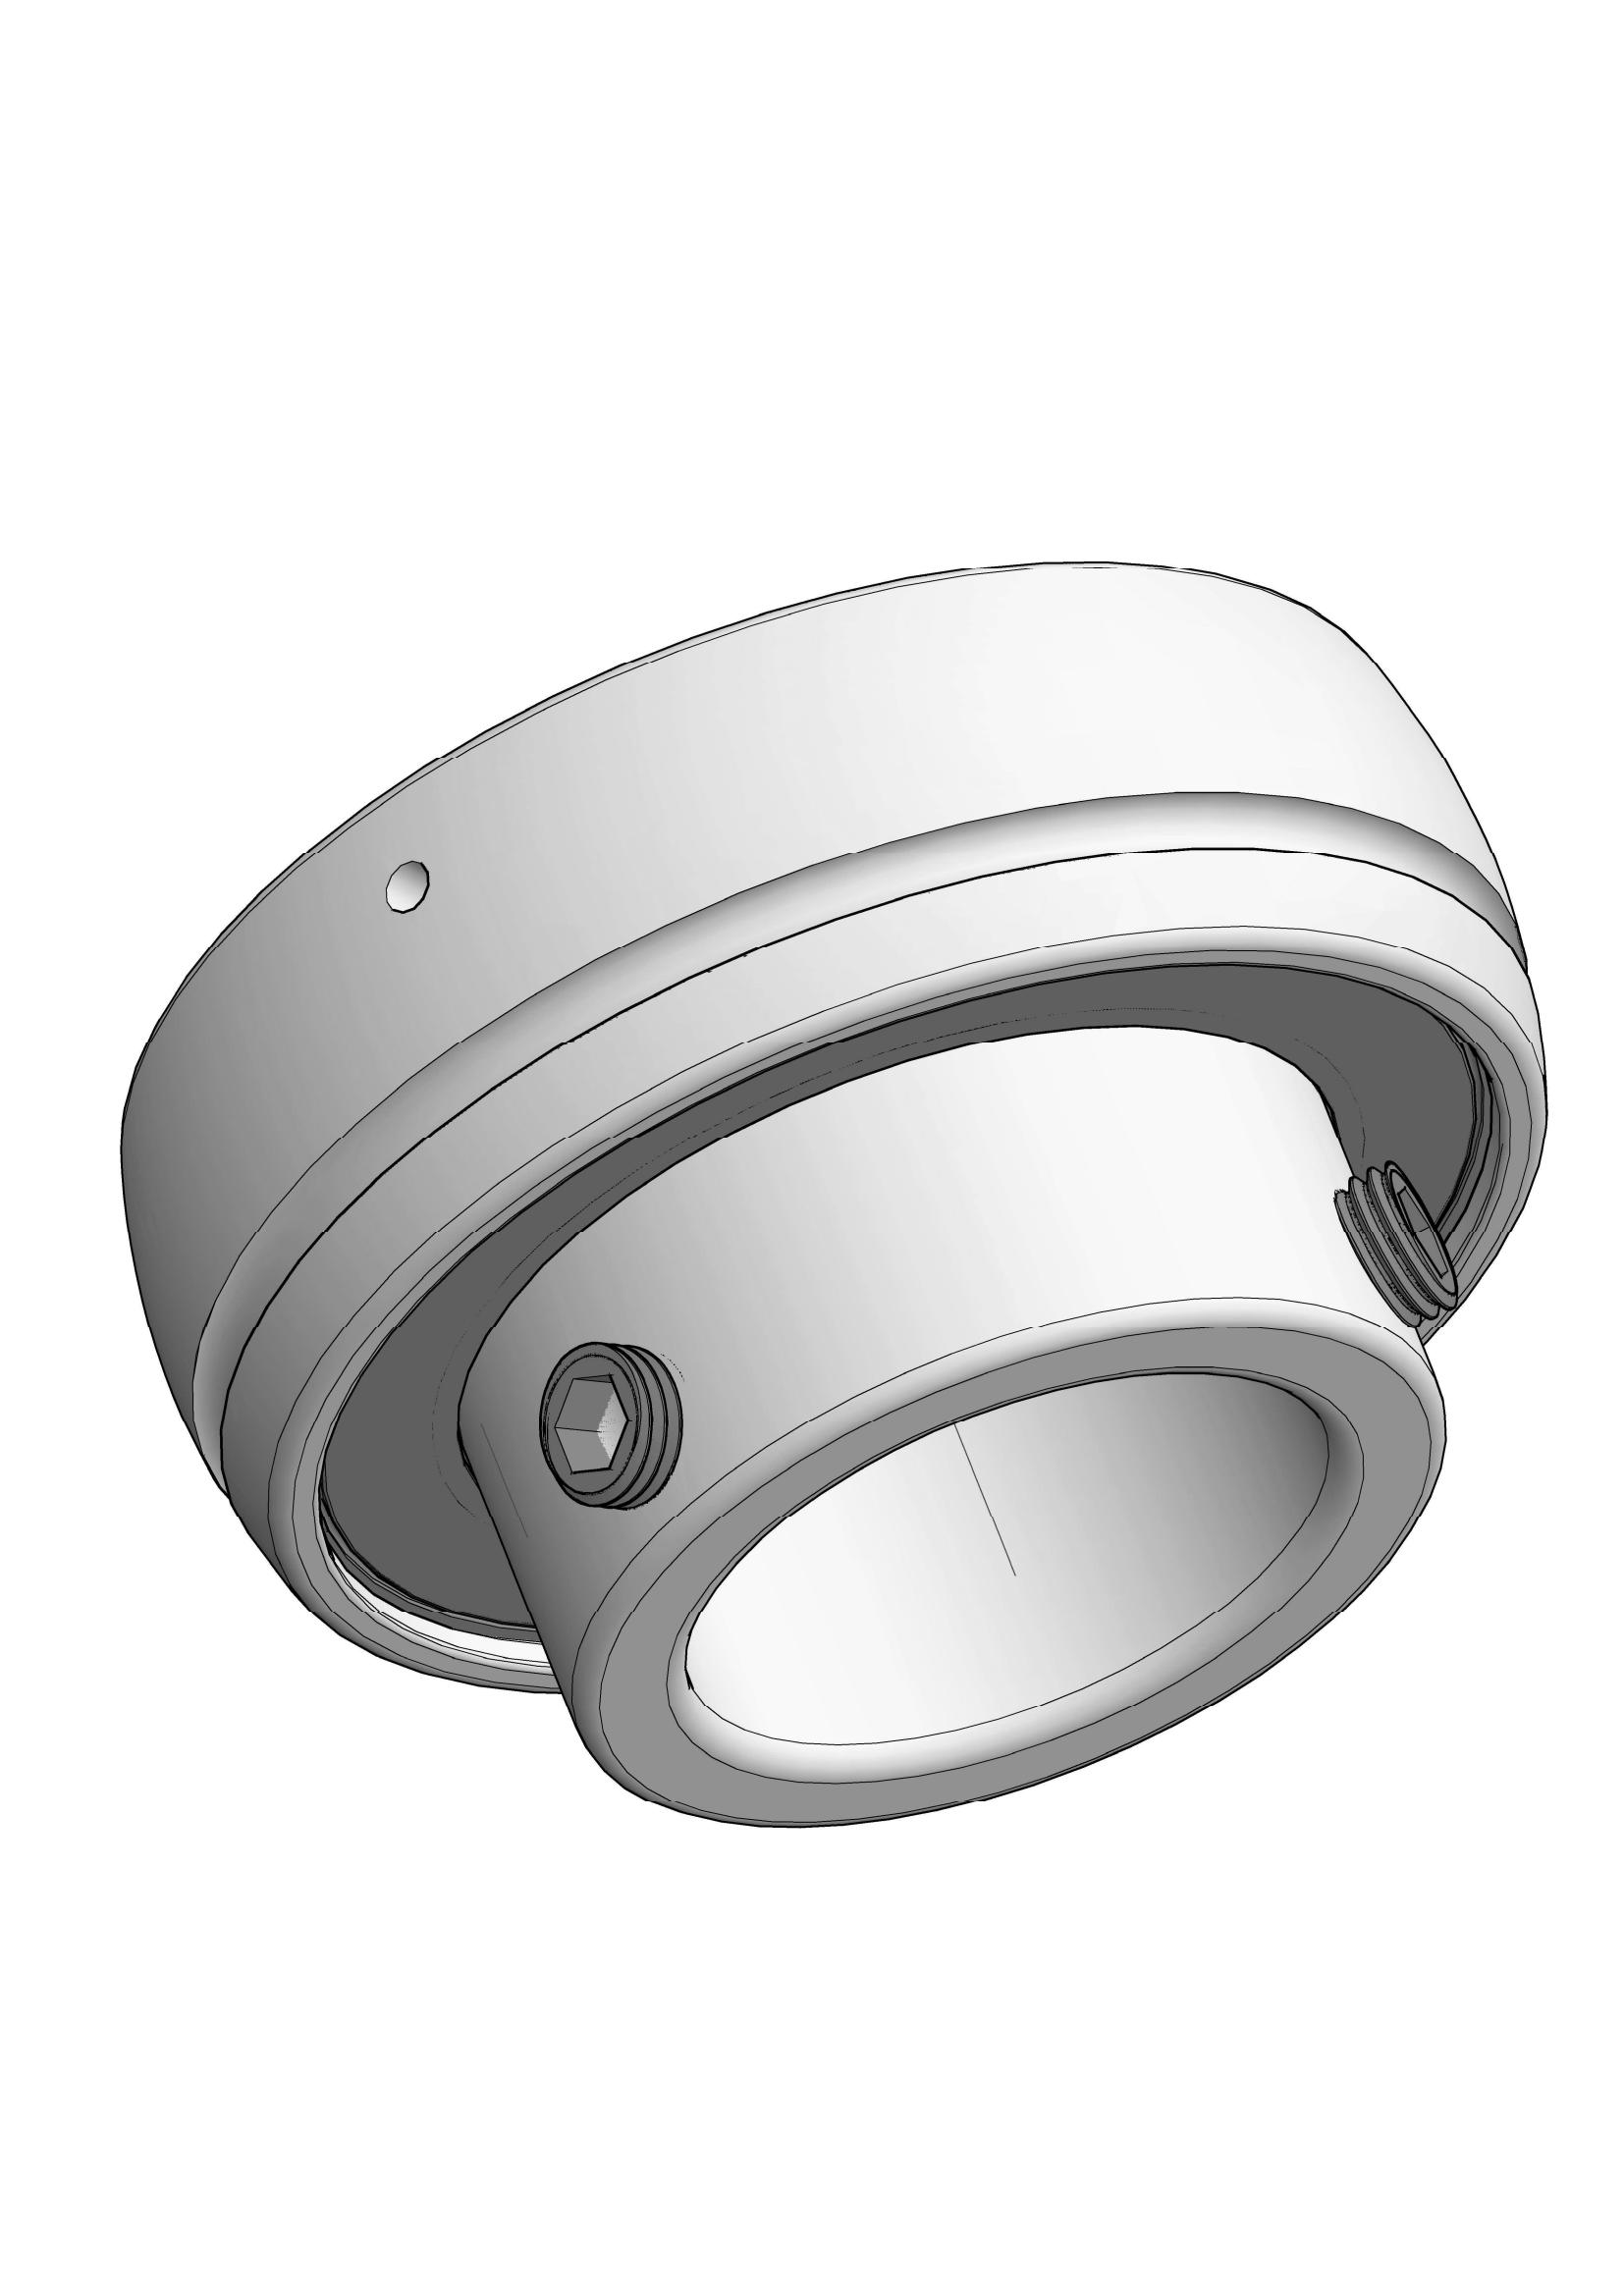 SB210-29 insert ball bearings with Eccentric Collar Lock with 1-13/16 inch Bore